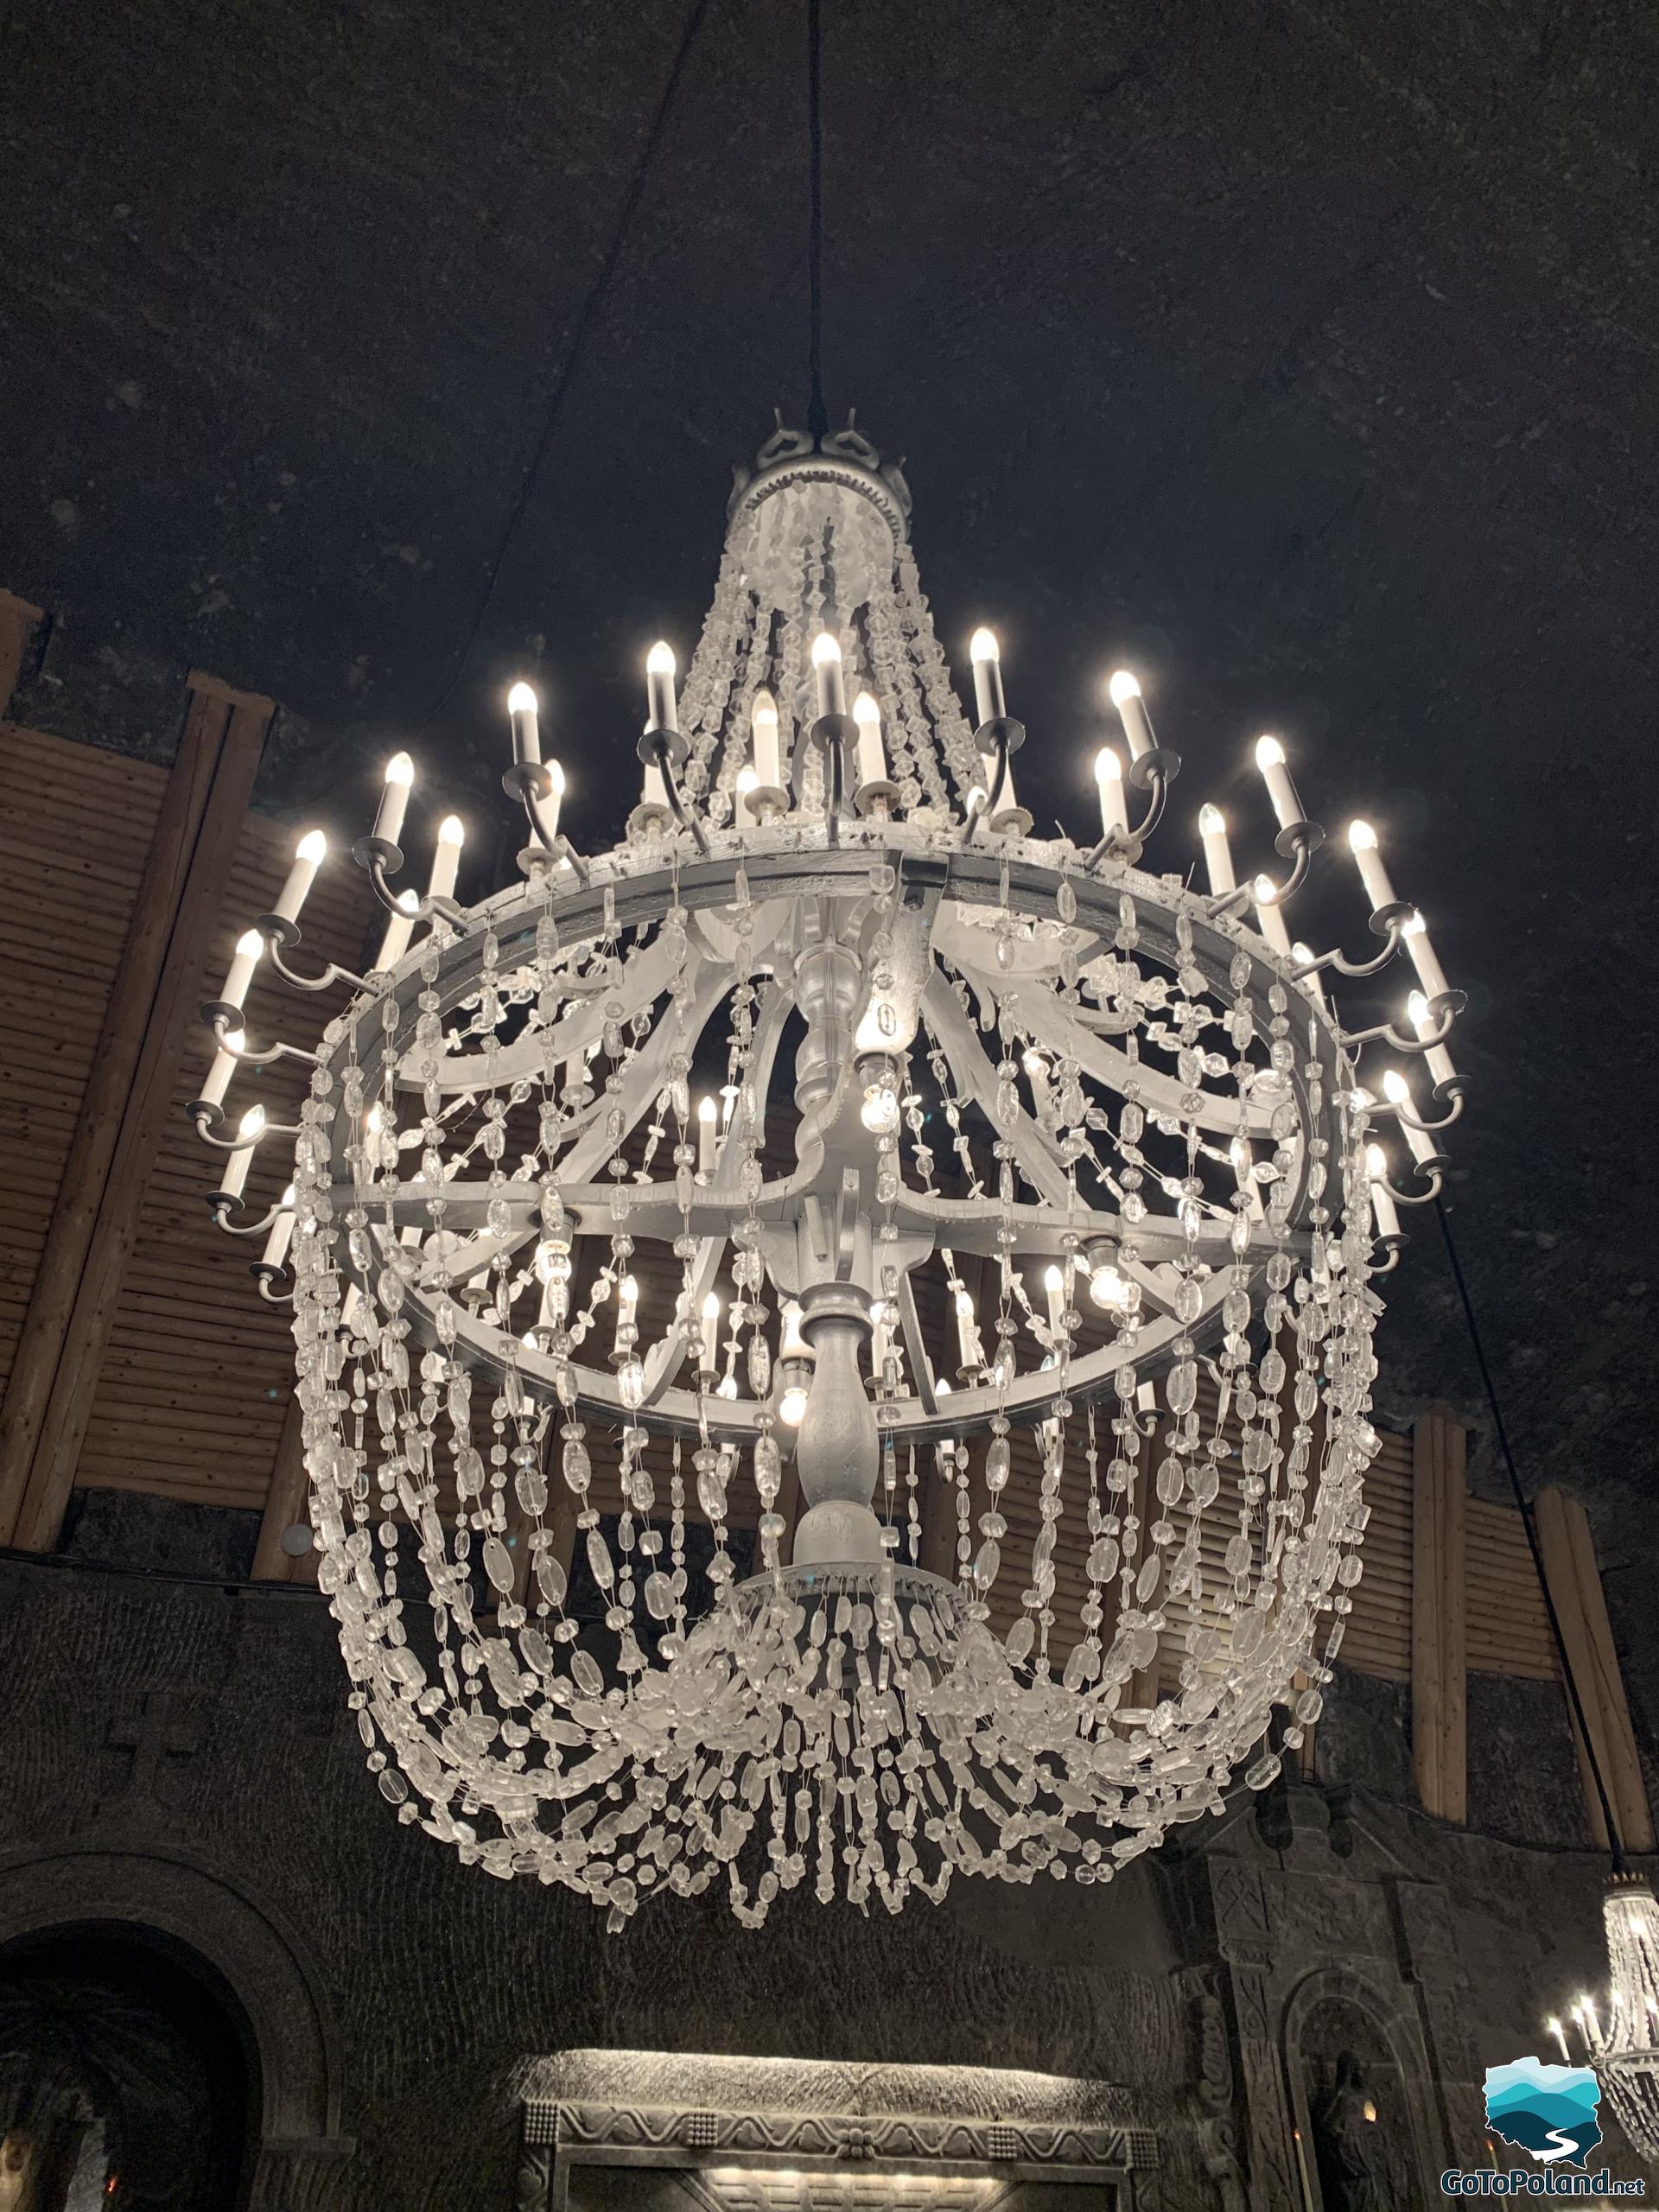 The salty chandelier